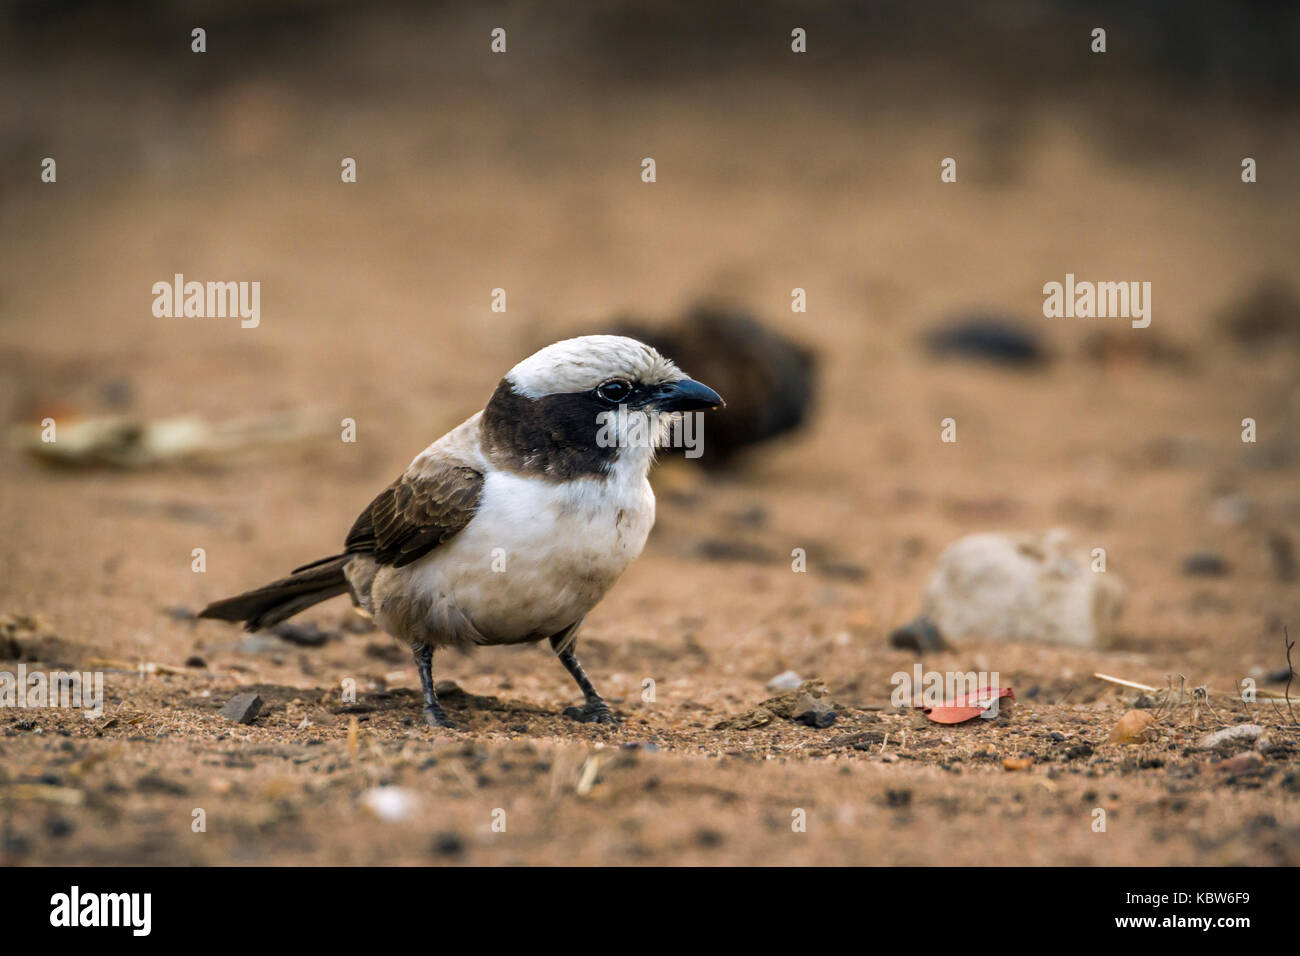 White-crowned shrike in Kruger national park, South Africa ;Specie Eurocephalus anguitimens family of Laniidae Stock Photo